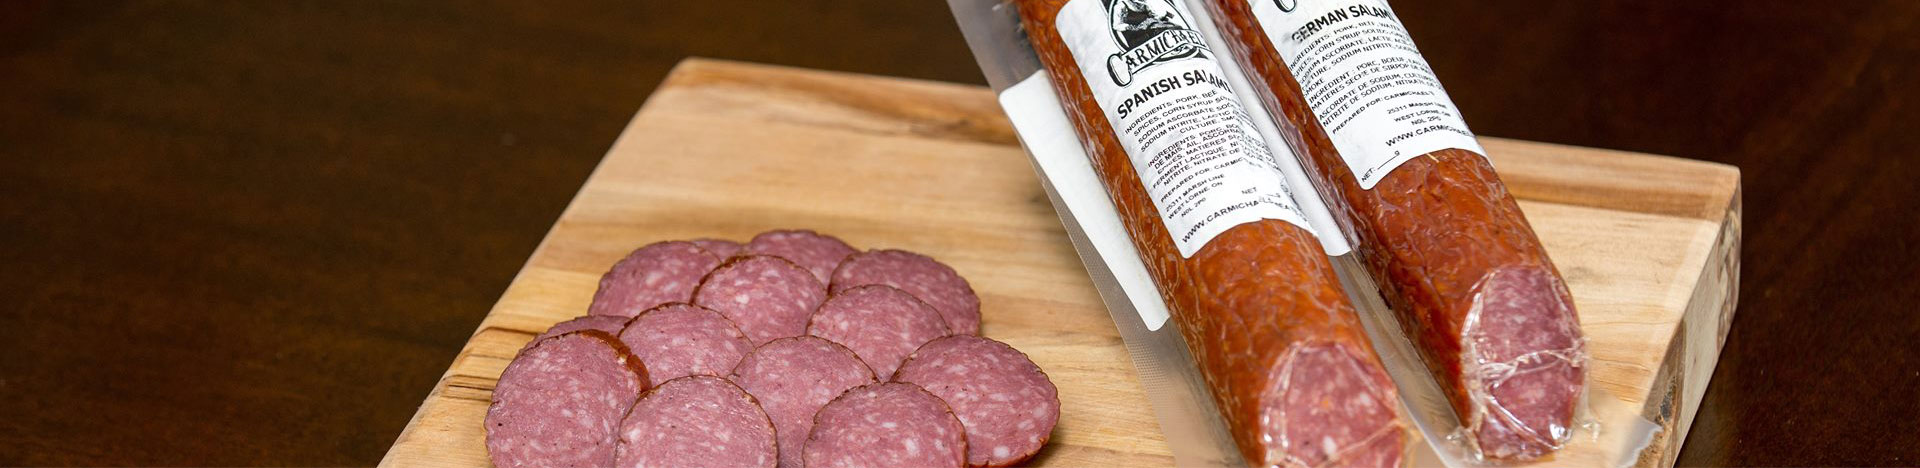 Specialty Meats - Smoked Sausages by Carmichaels Meats - Privacy Policy